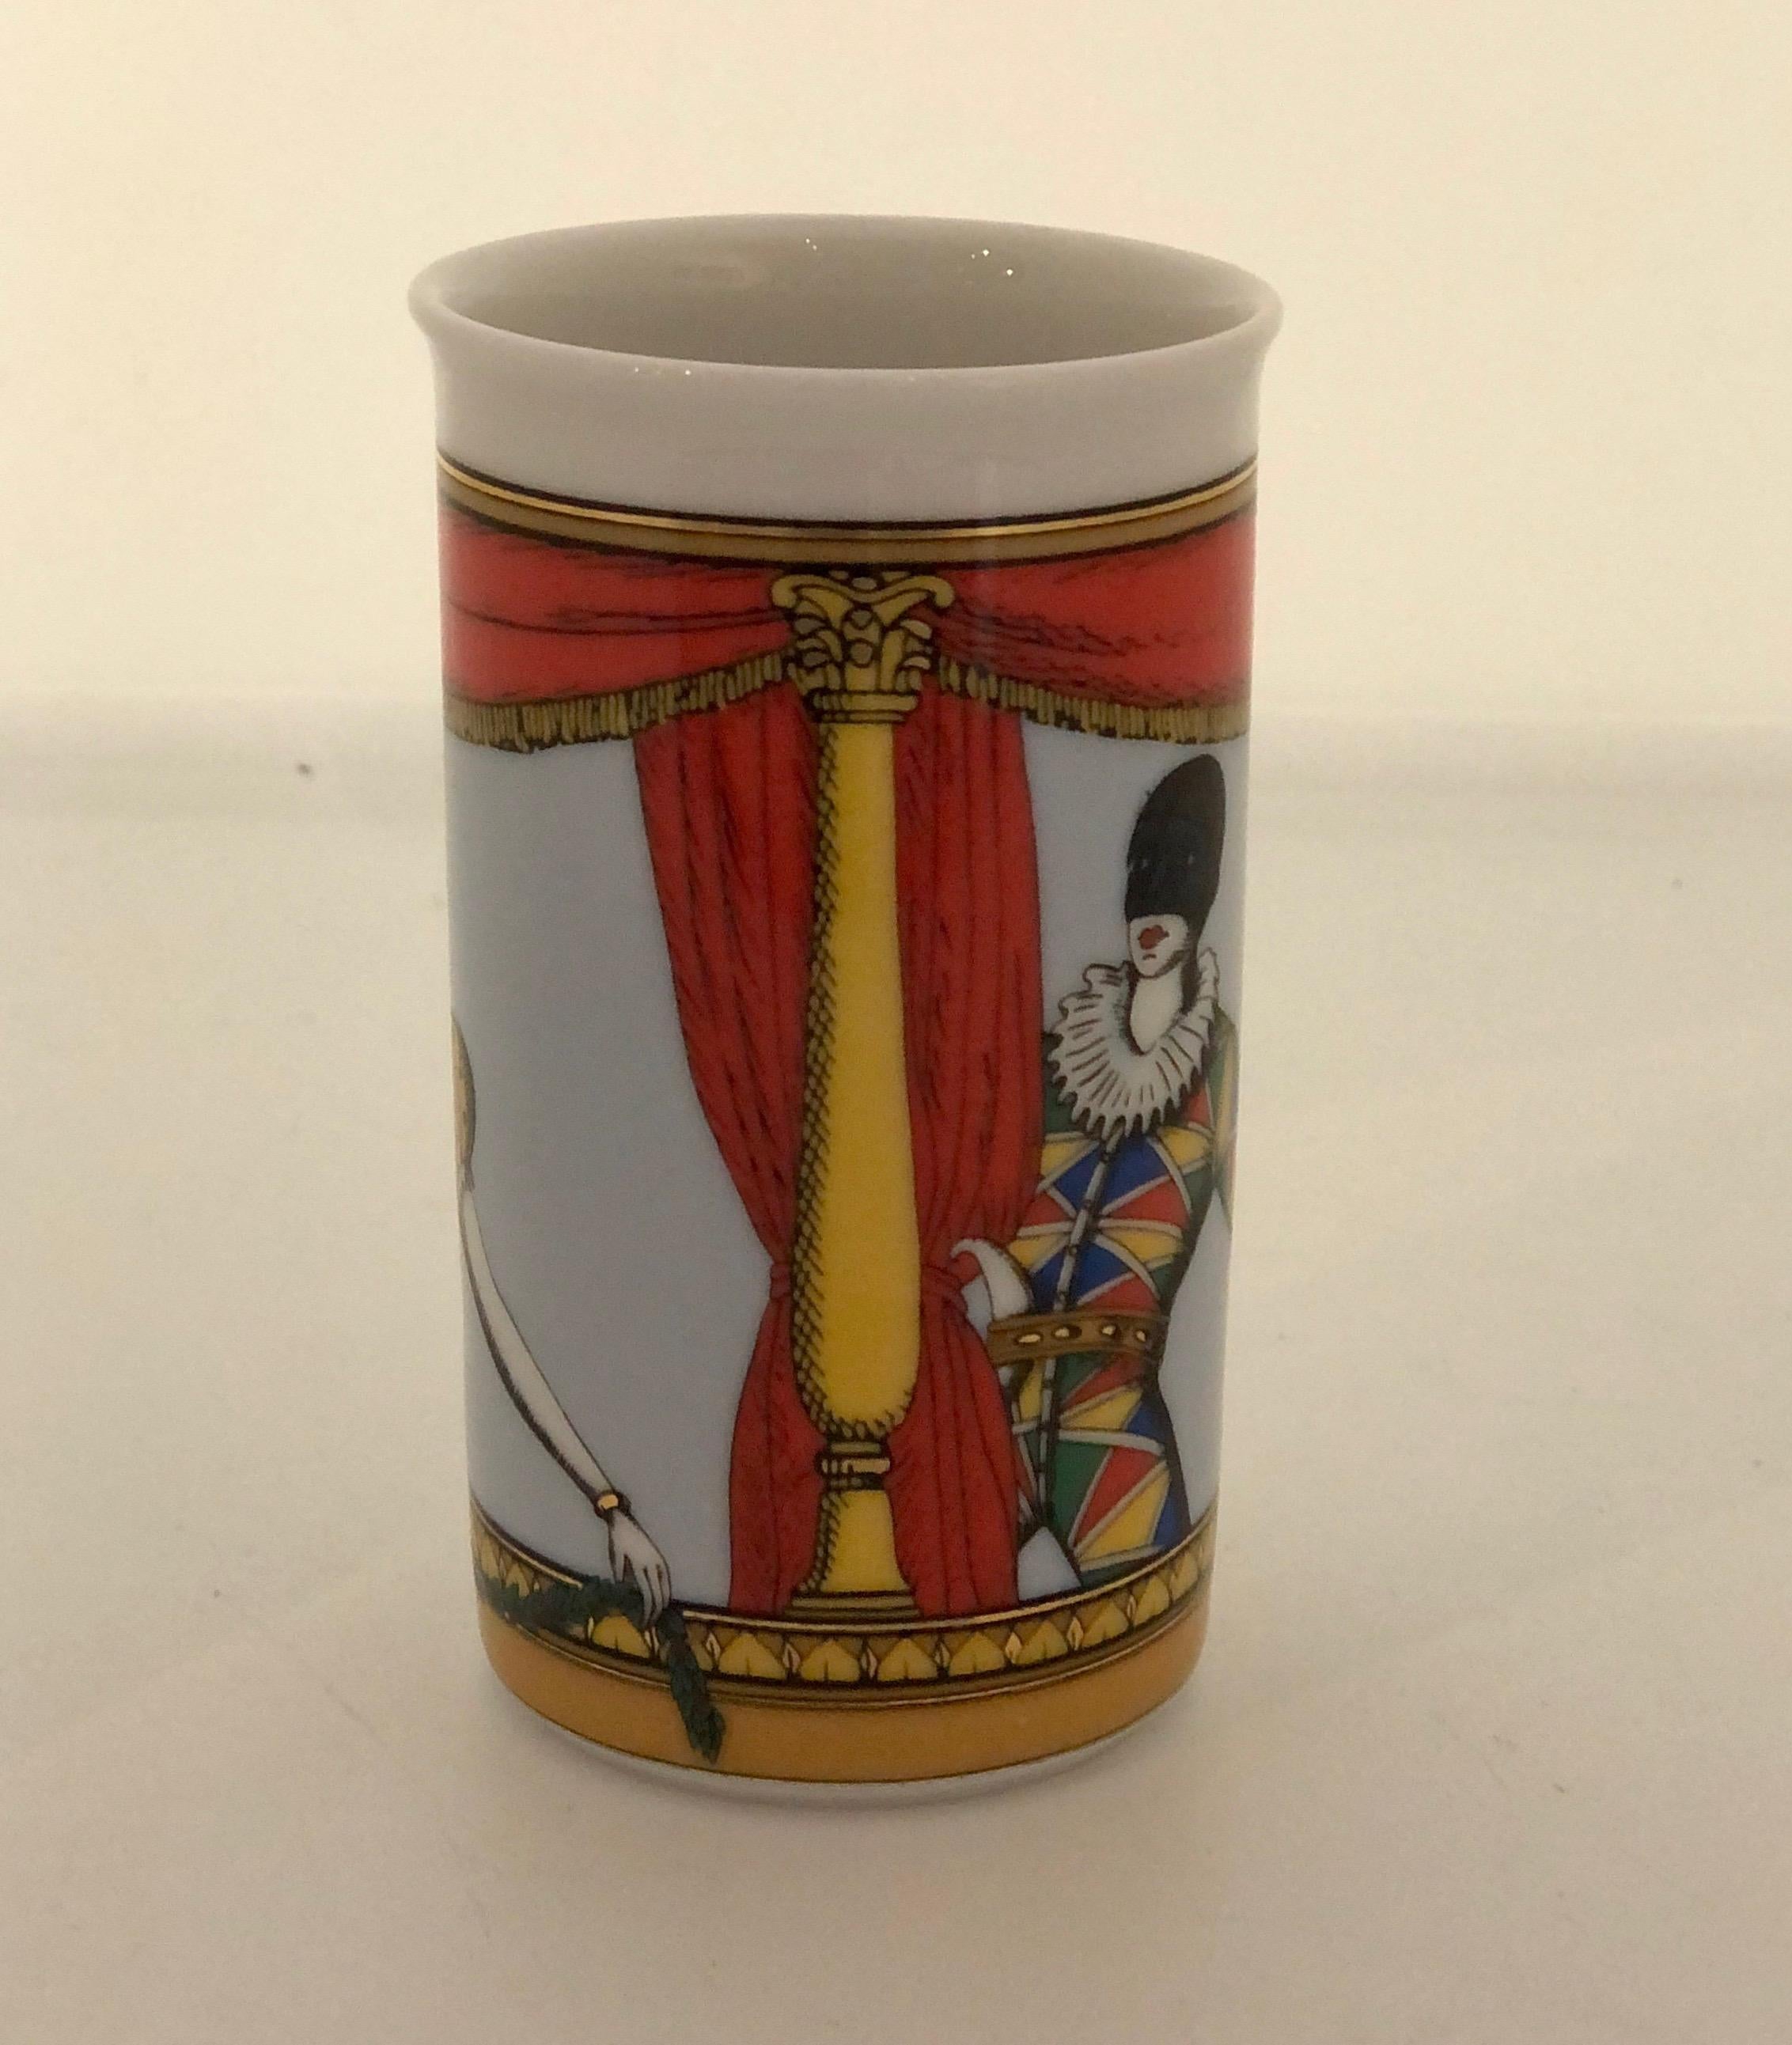 Offered is a signed Mid-Century Modern brightly colored in orange, blue, yellow, green and black court jester themed petite white porcelain vase or pencil holder by Fornasetti for Rosenthal. The court jester theme and vibrant colors bring